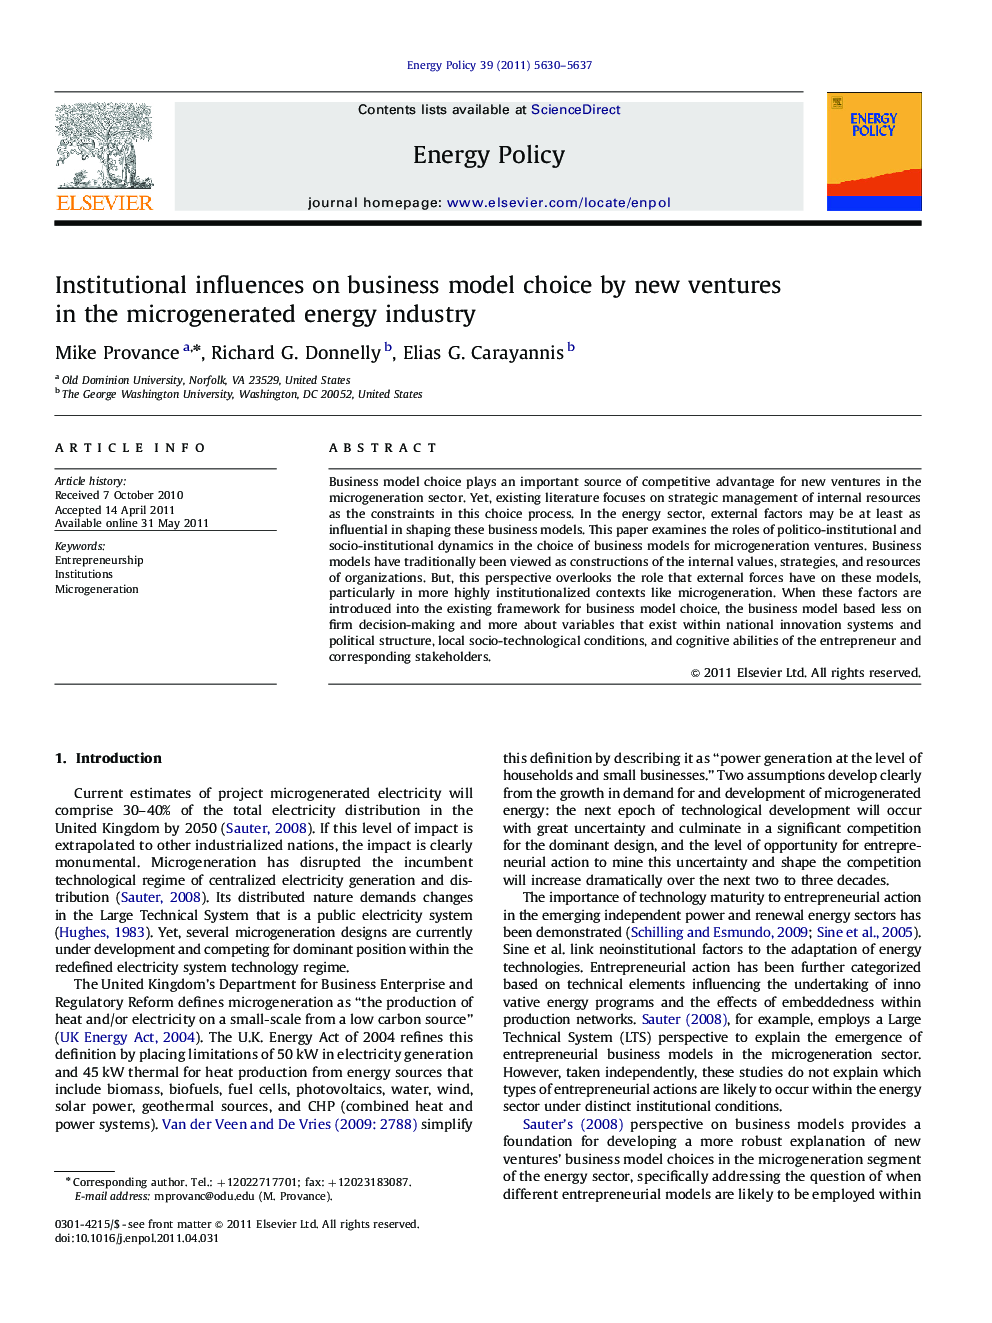 Institutional influences on business model choice by new ventures in the microgenerated energy industry